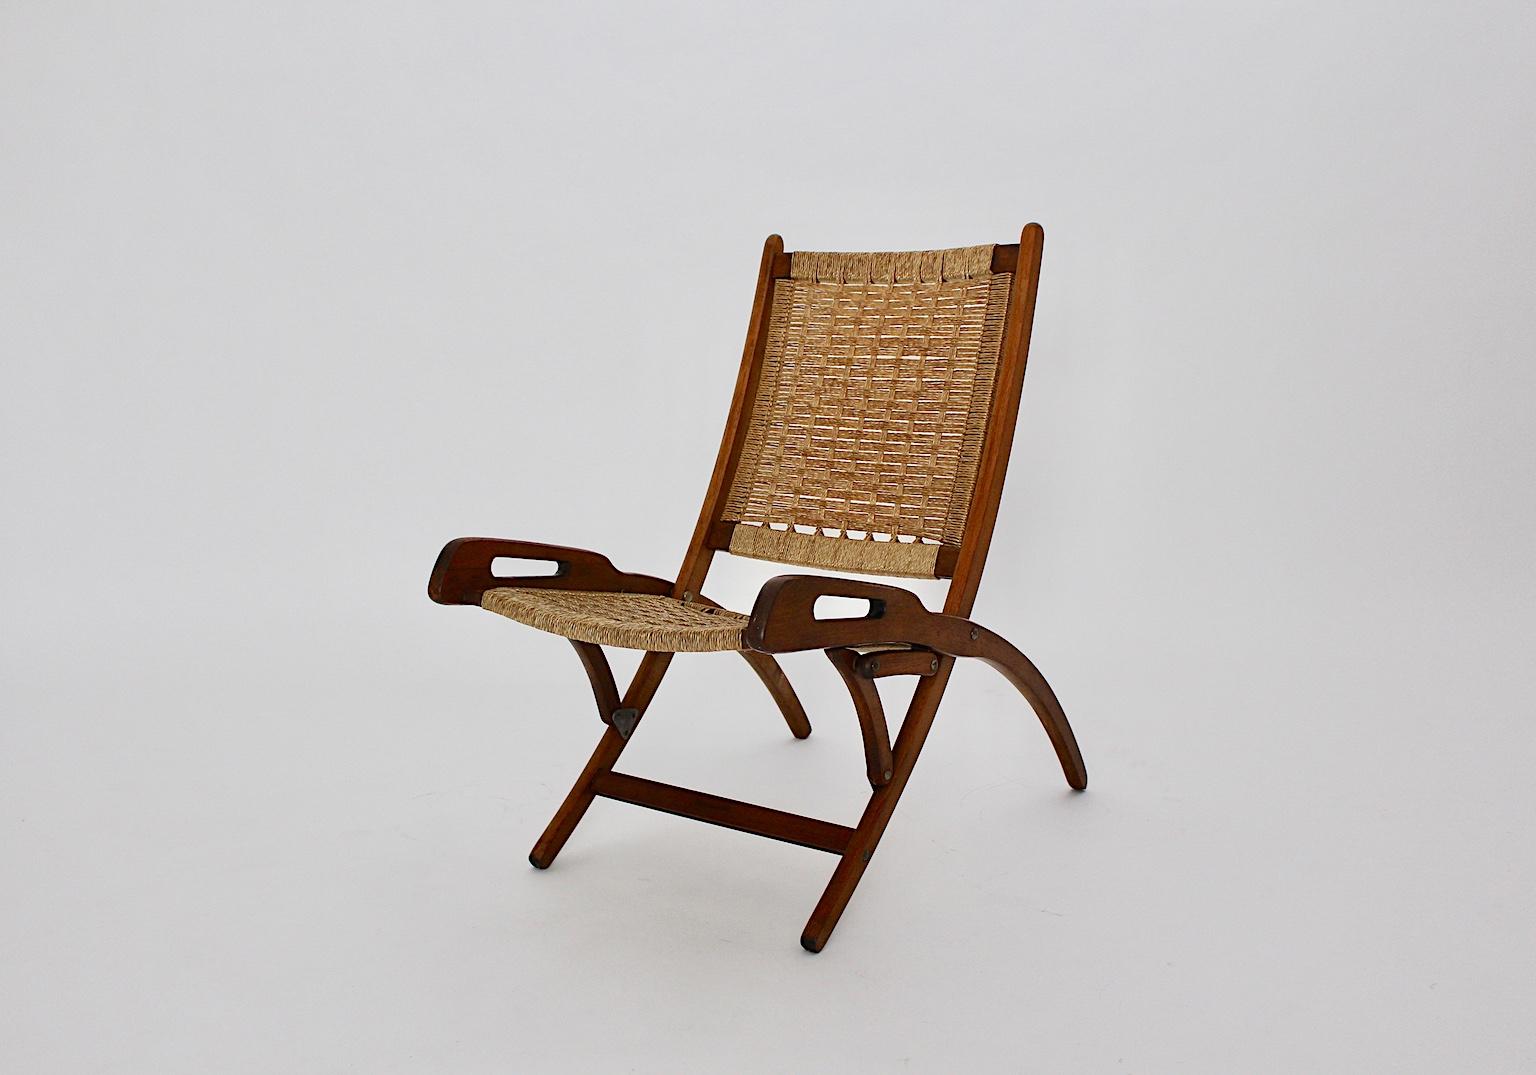 Mid-Century Modern vintage beech folding chair or lounge chair, which was made in 1960s in Italy. It consists of a solid brown stained and lacquered beechwood construction, while the seat and back were made of woven nylon ropes.
The folding chair is